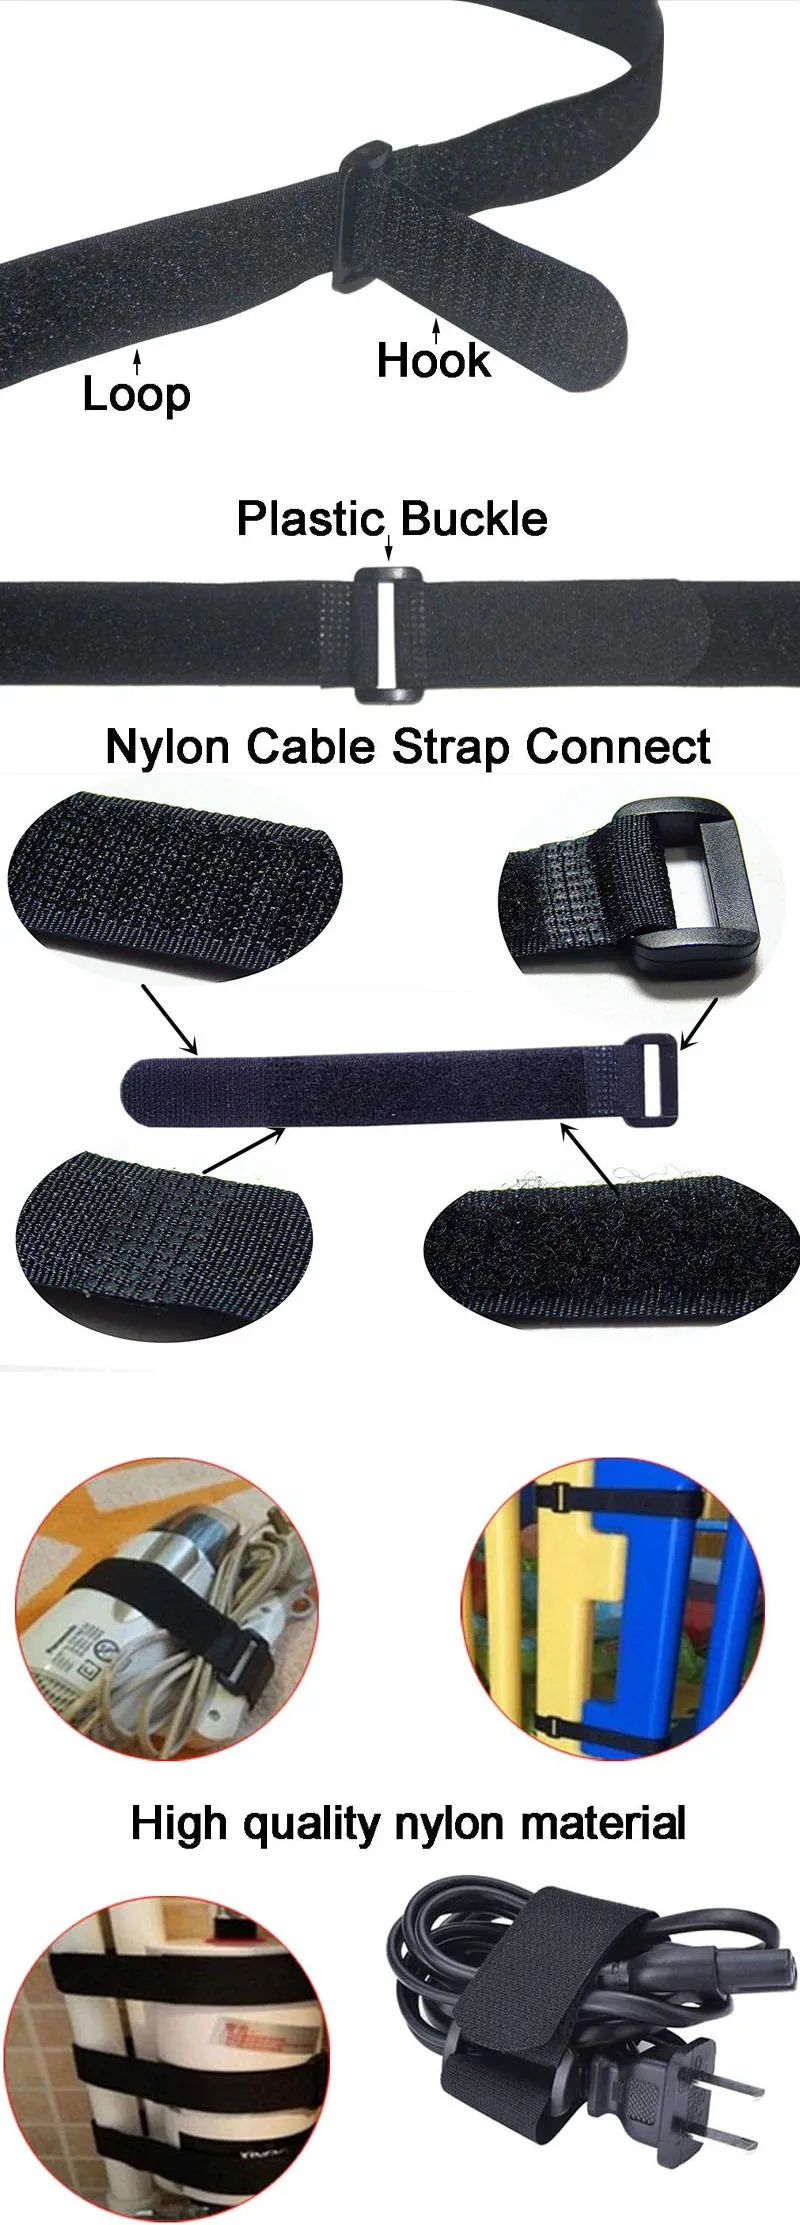 10pcs Reusable Cable Straps Multipurpose Quality Hook and Loop Securing Straps Adjustable Cable Ties Black Nylon 2.5cm Width